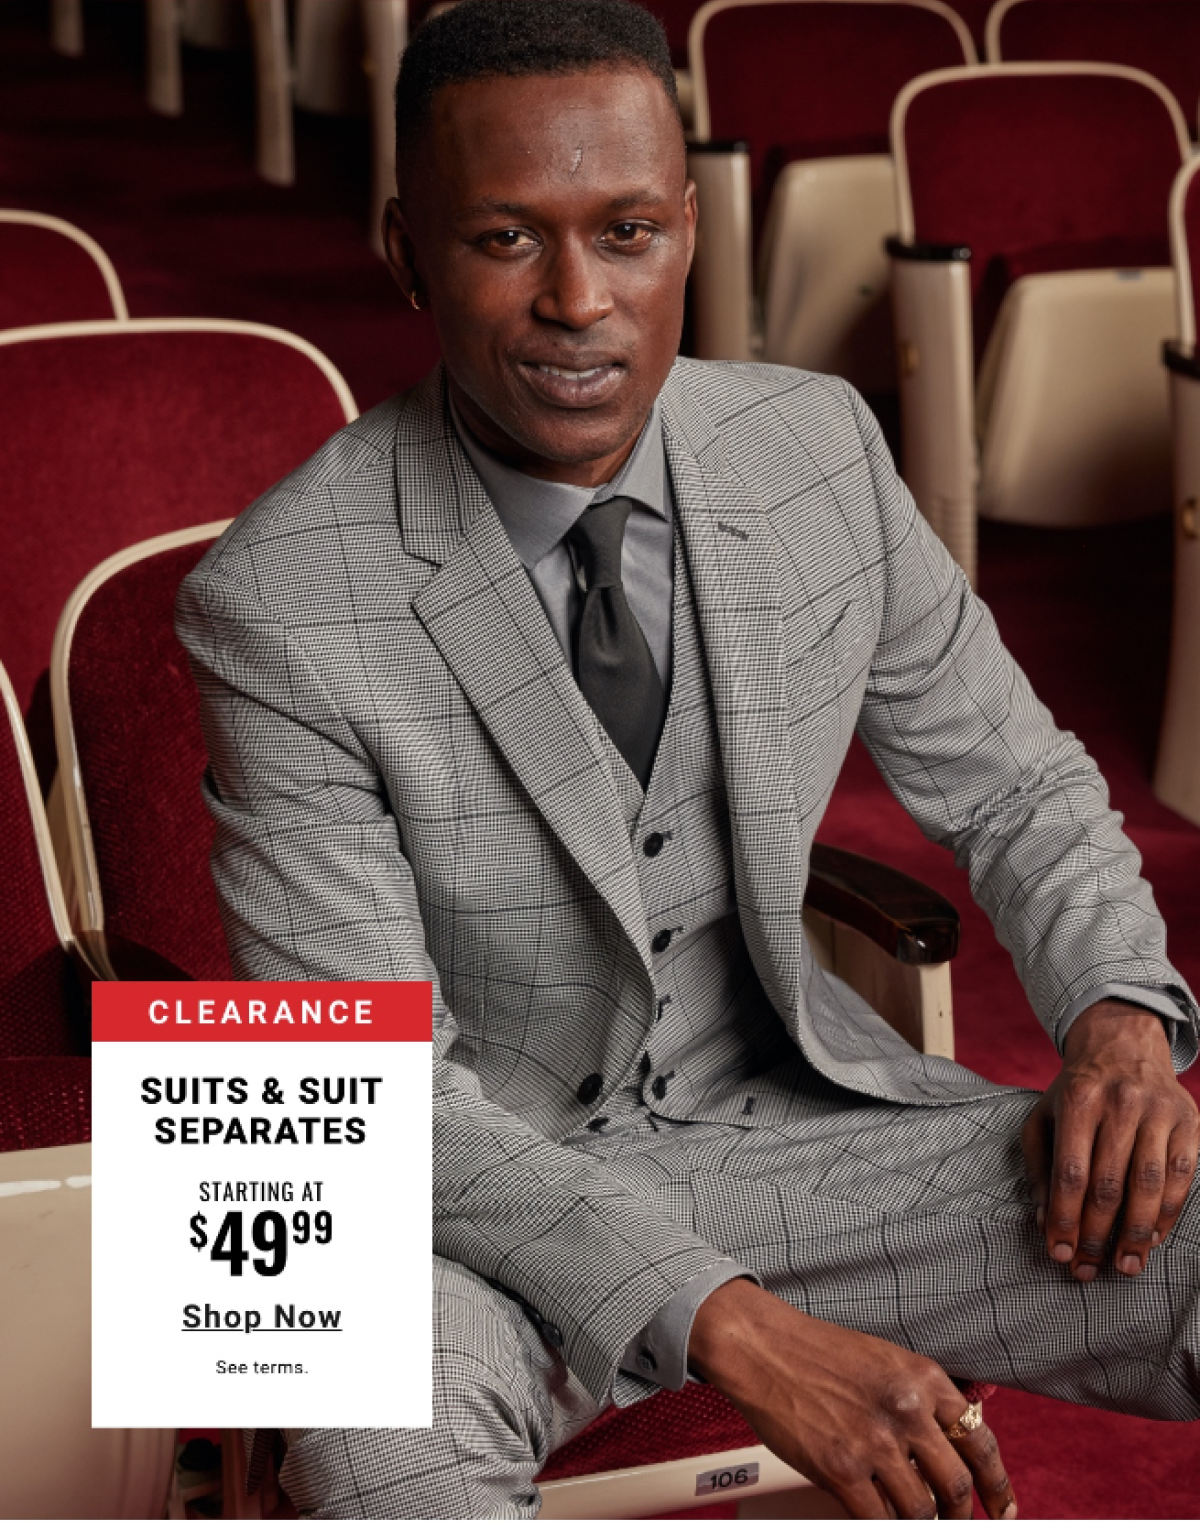 Clearance Suits Starting at $49.99